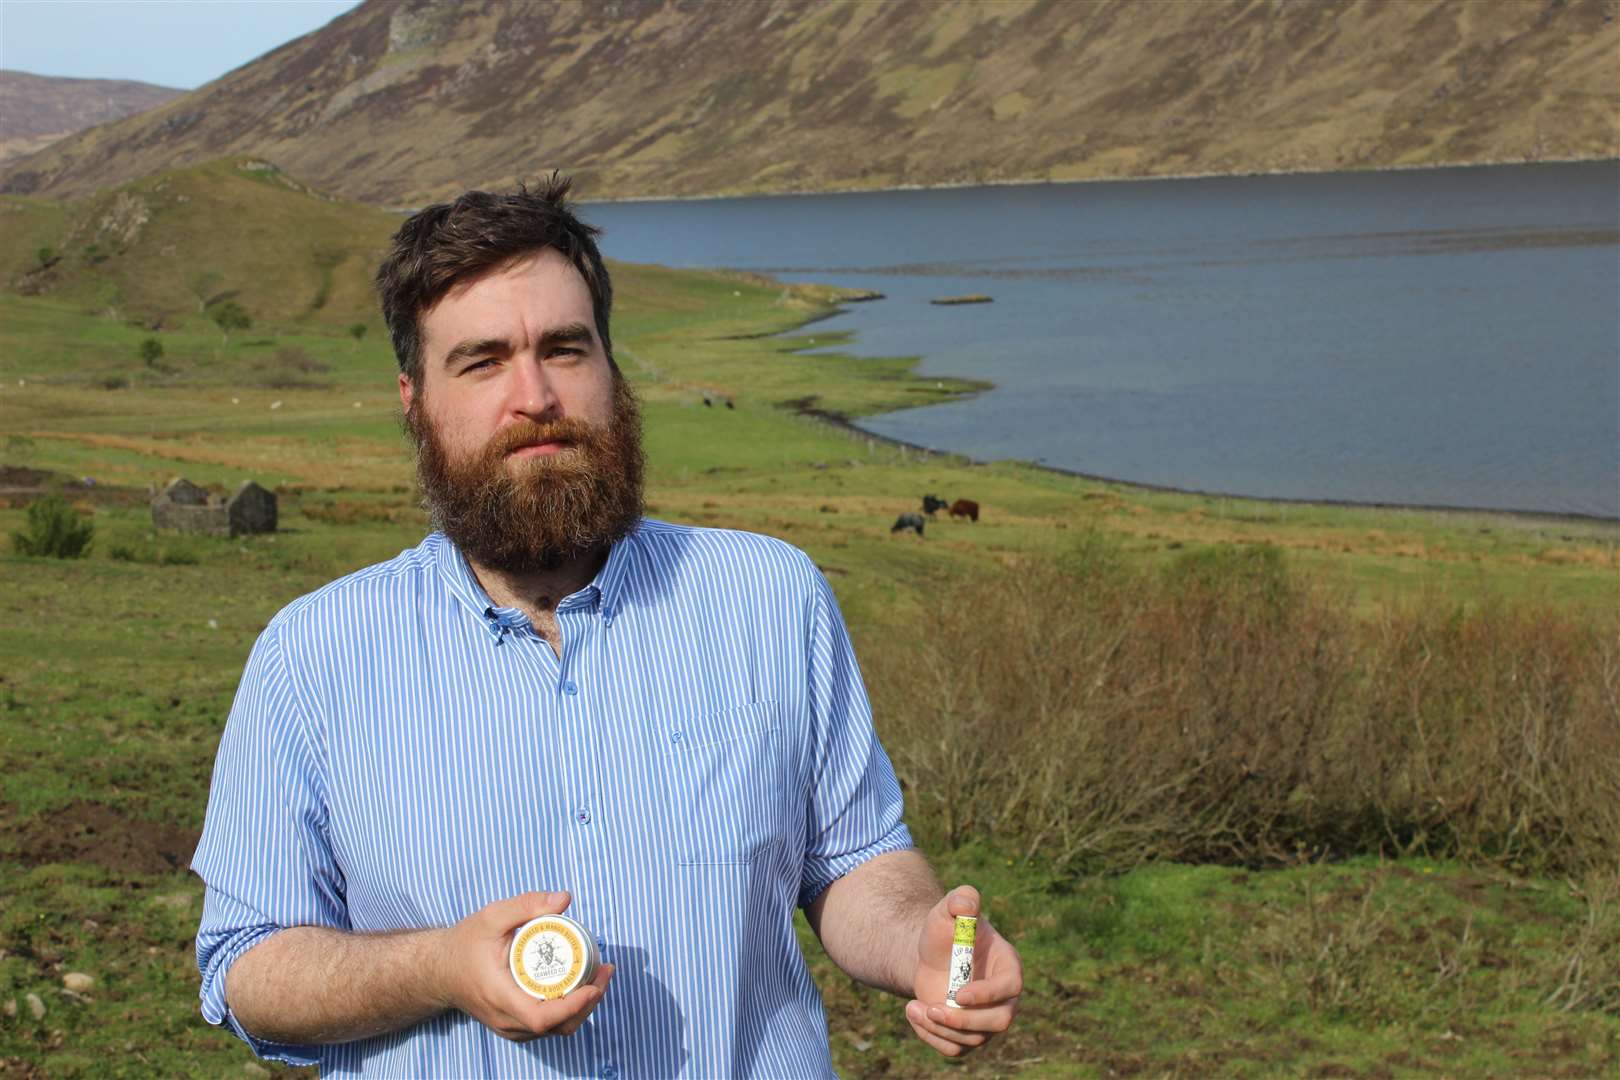 Ben Oakes, Isle of Skye Seaweed Company who has been supported through Business Gateway Highland.